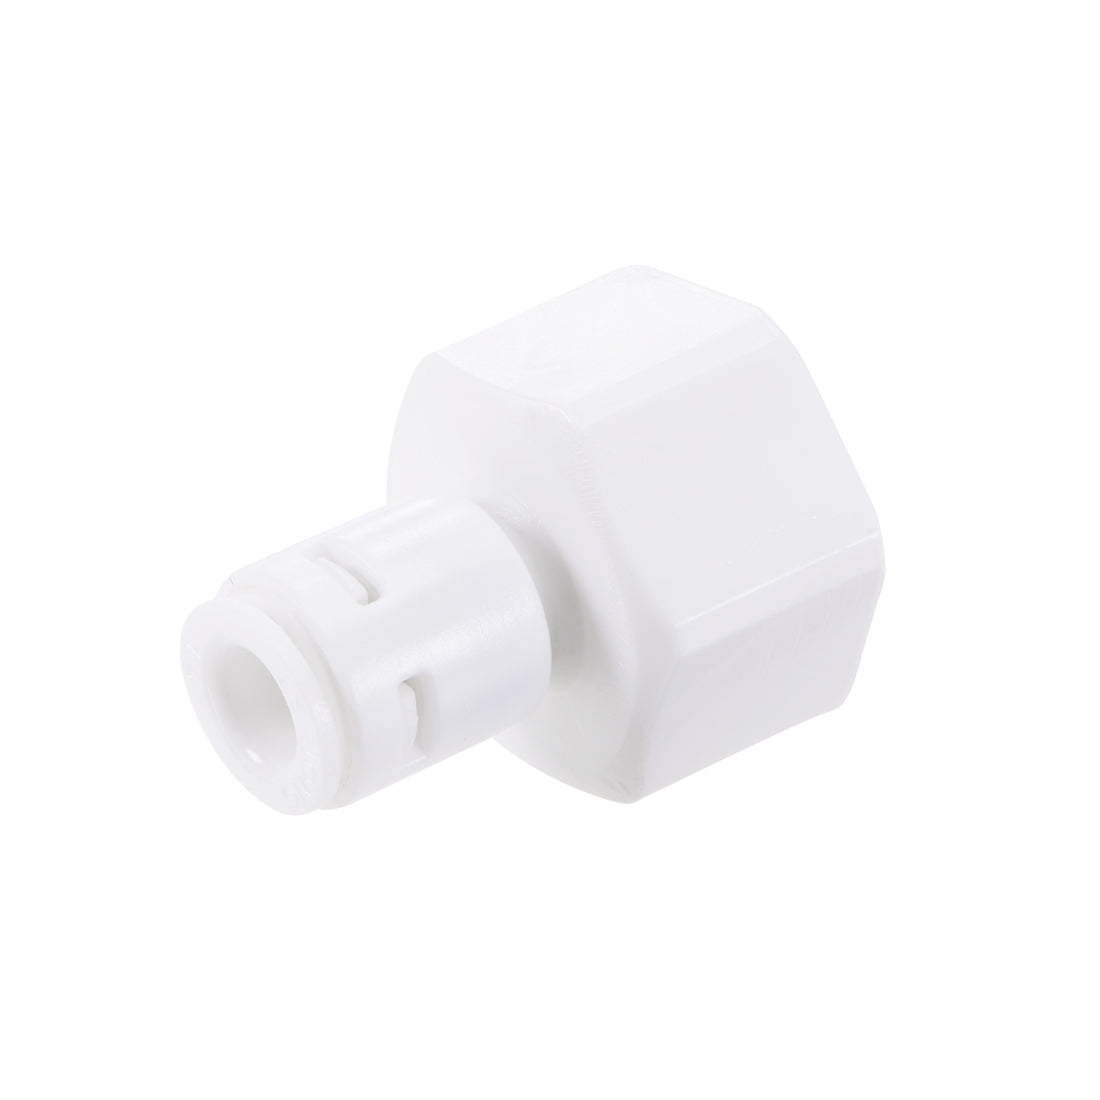 uxcell Uxcell Quick Connector G1/2 Female Thread to 1/4" Tube, Straight Connect Fittings for Water Purifier, 34mm White 2Pcs